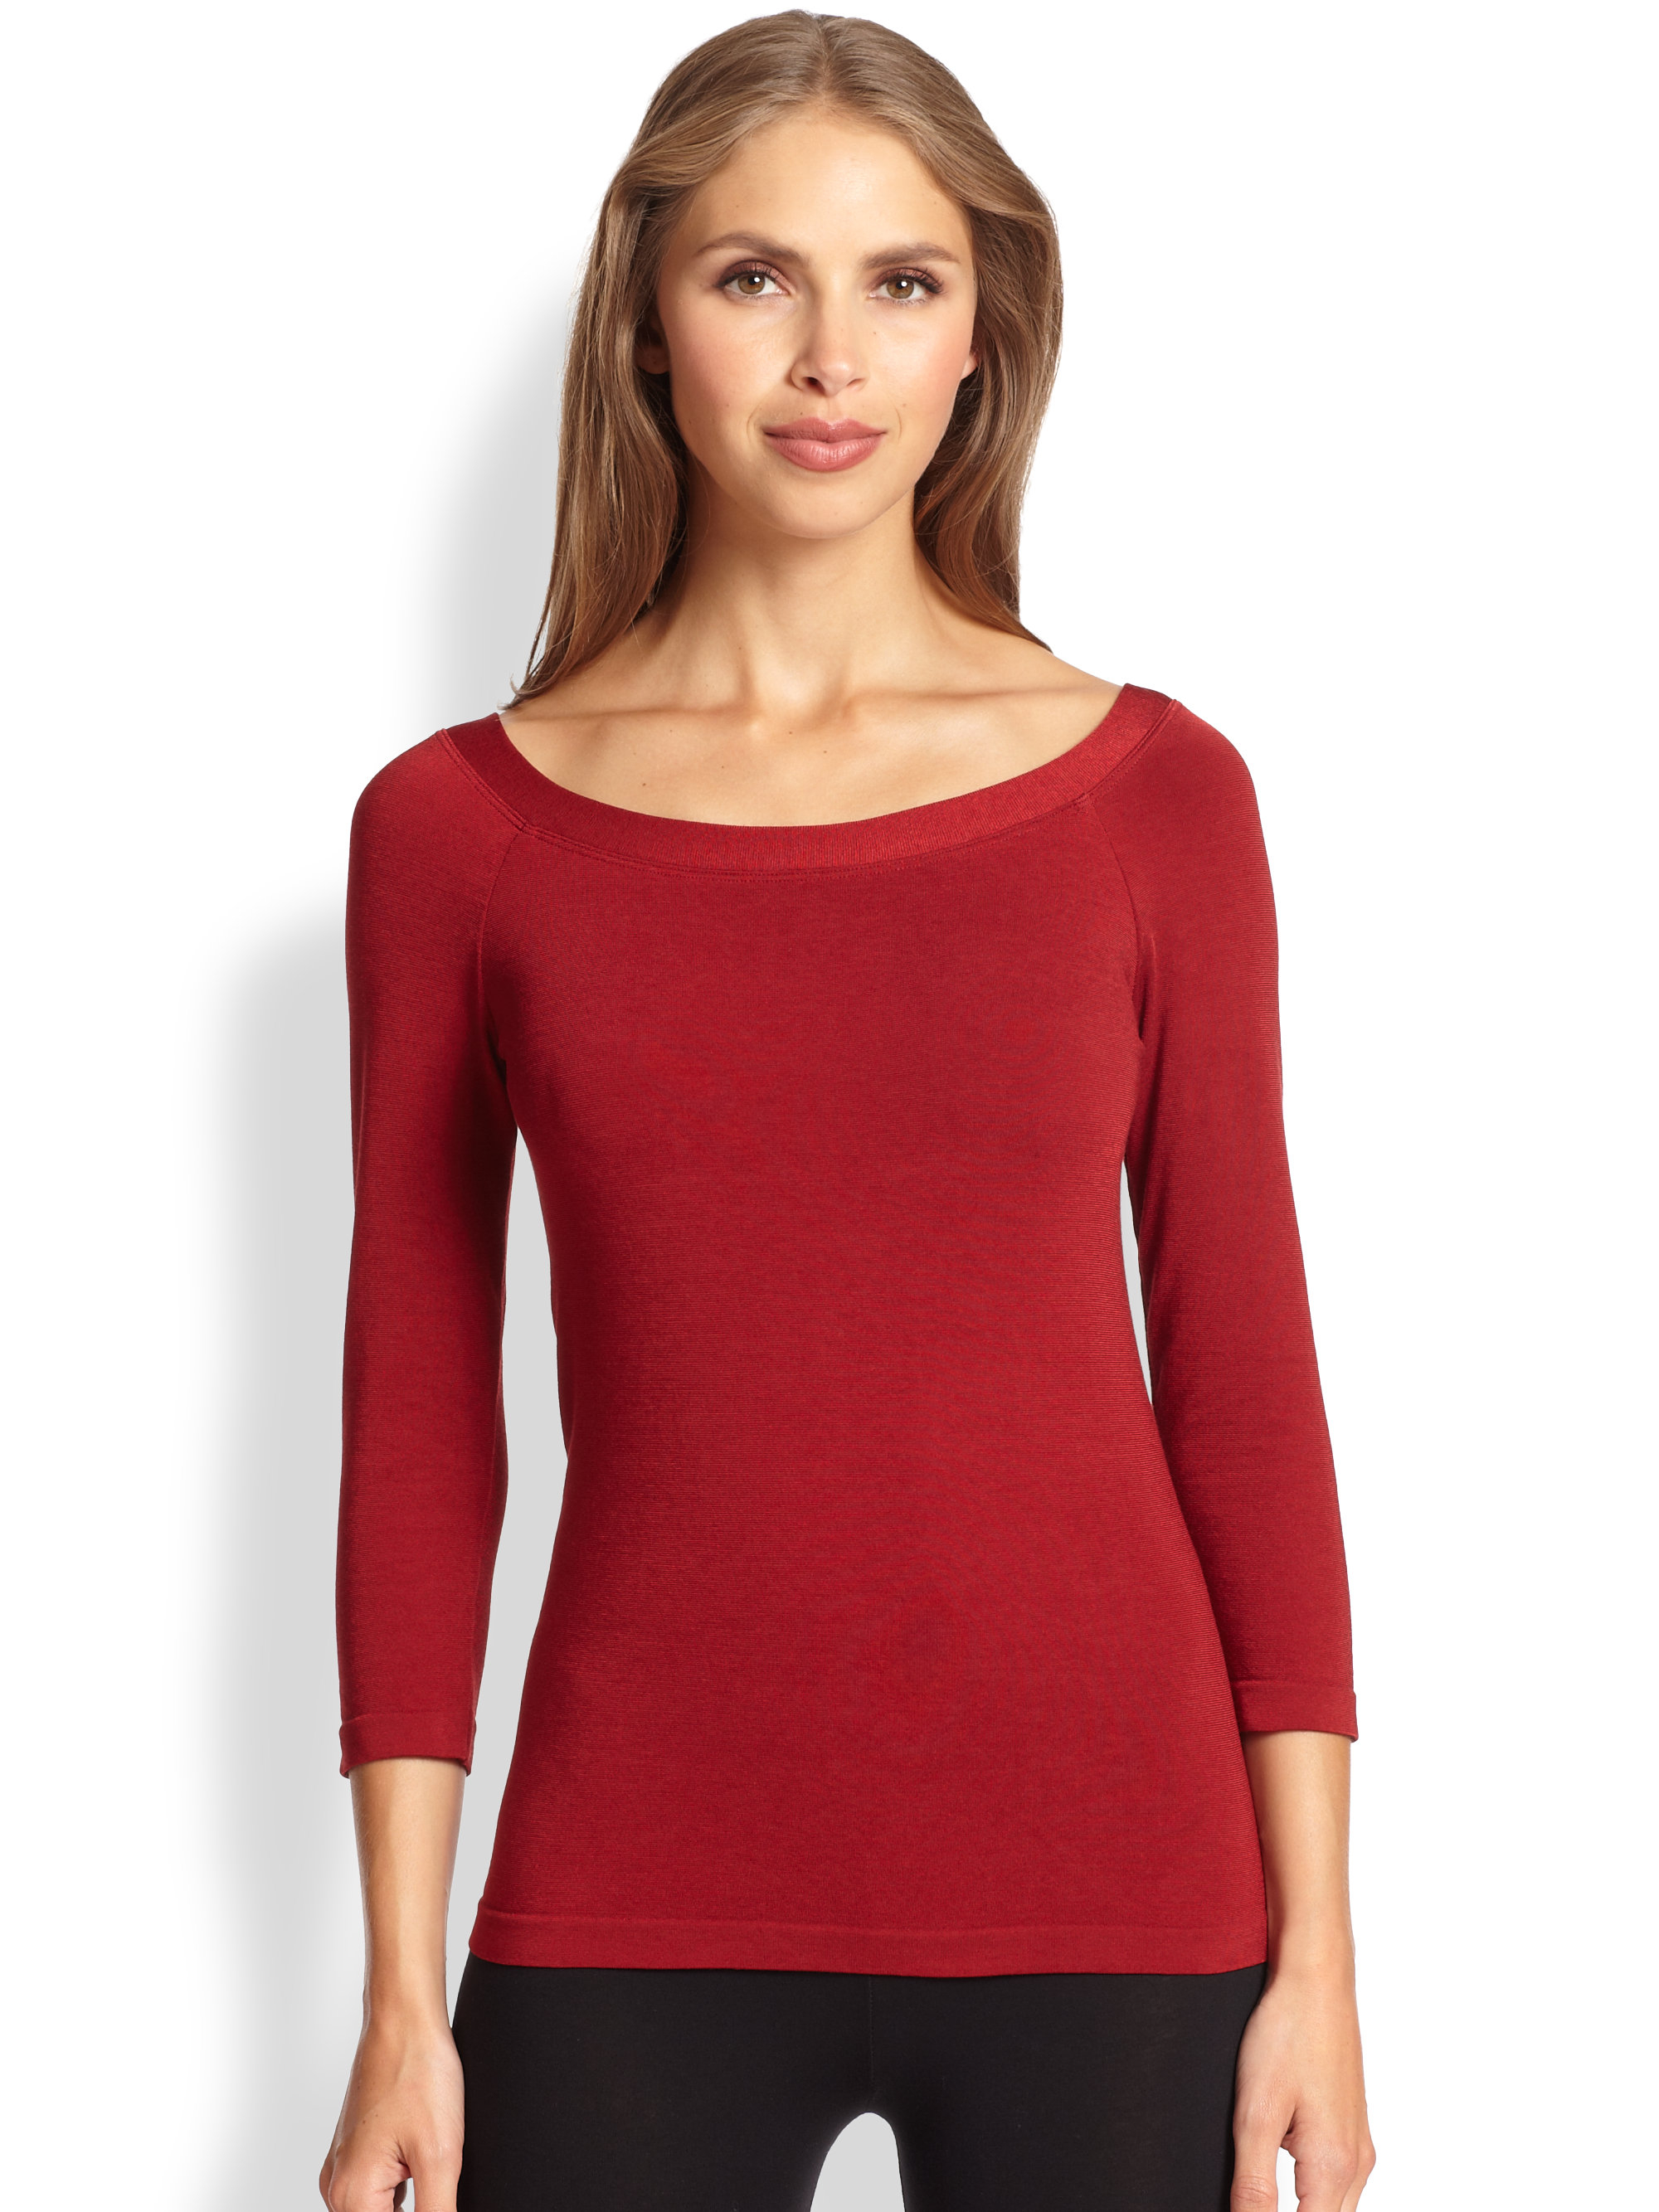 Lyst - Wolford Cordoba Pullover in Red